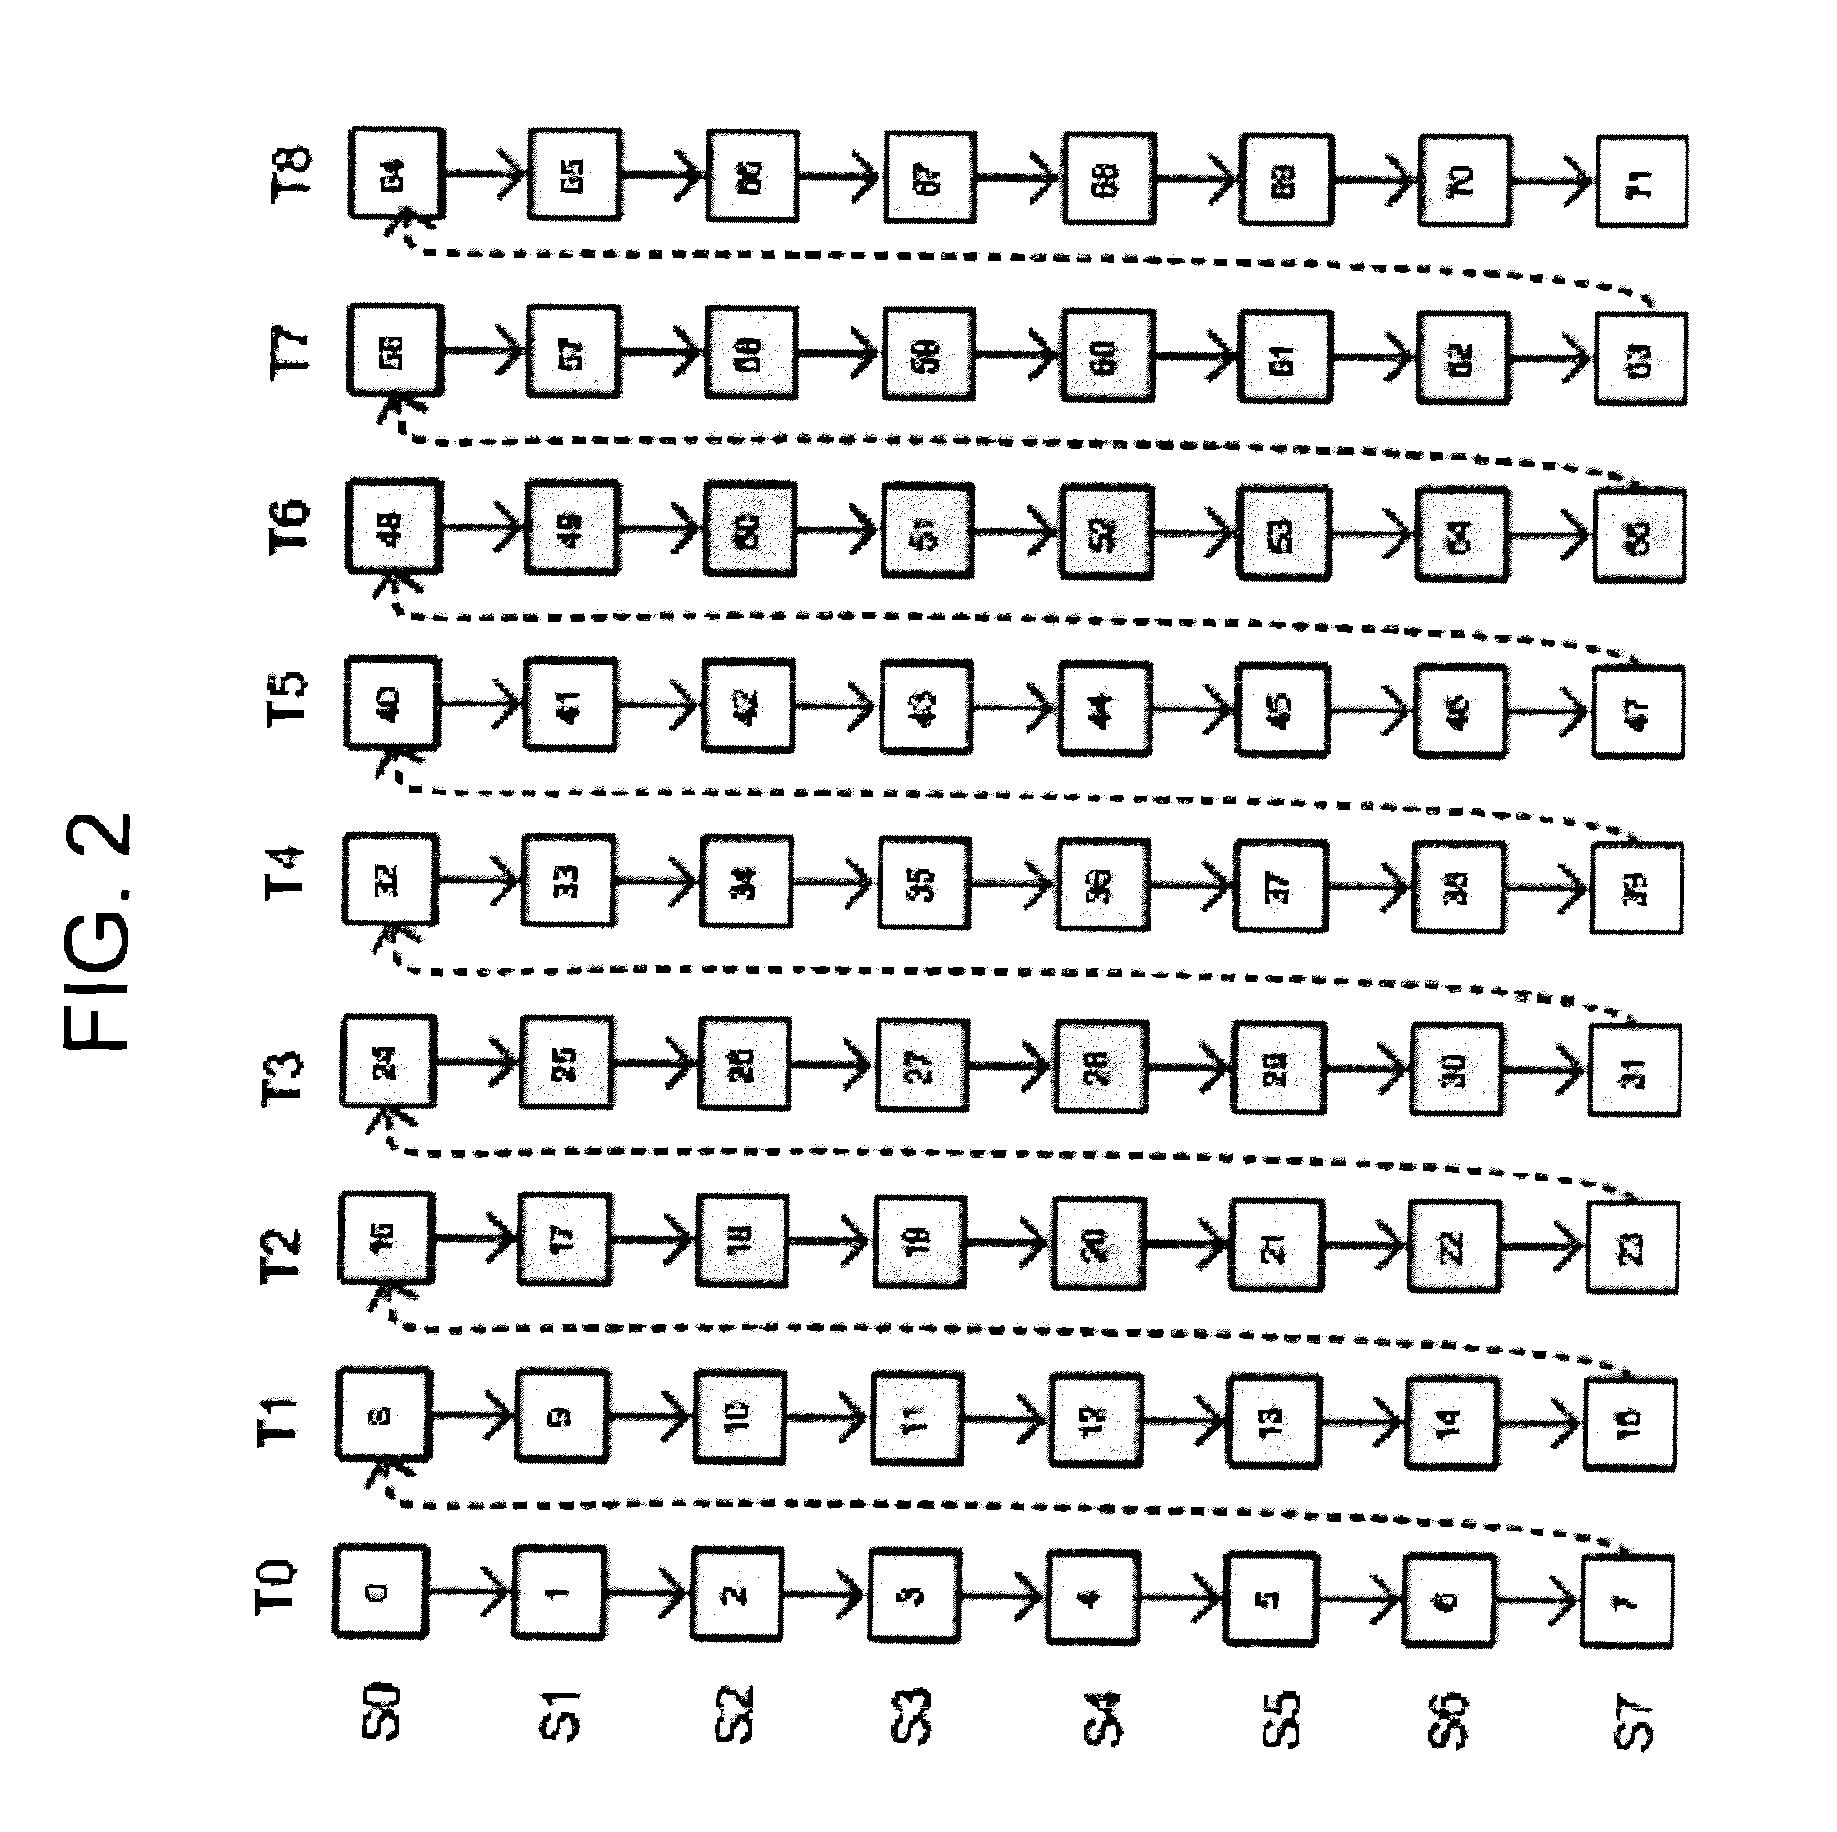 System and method for implementing low-complexity multi-view video coding